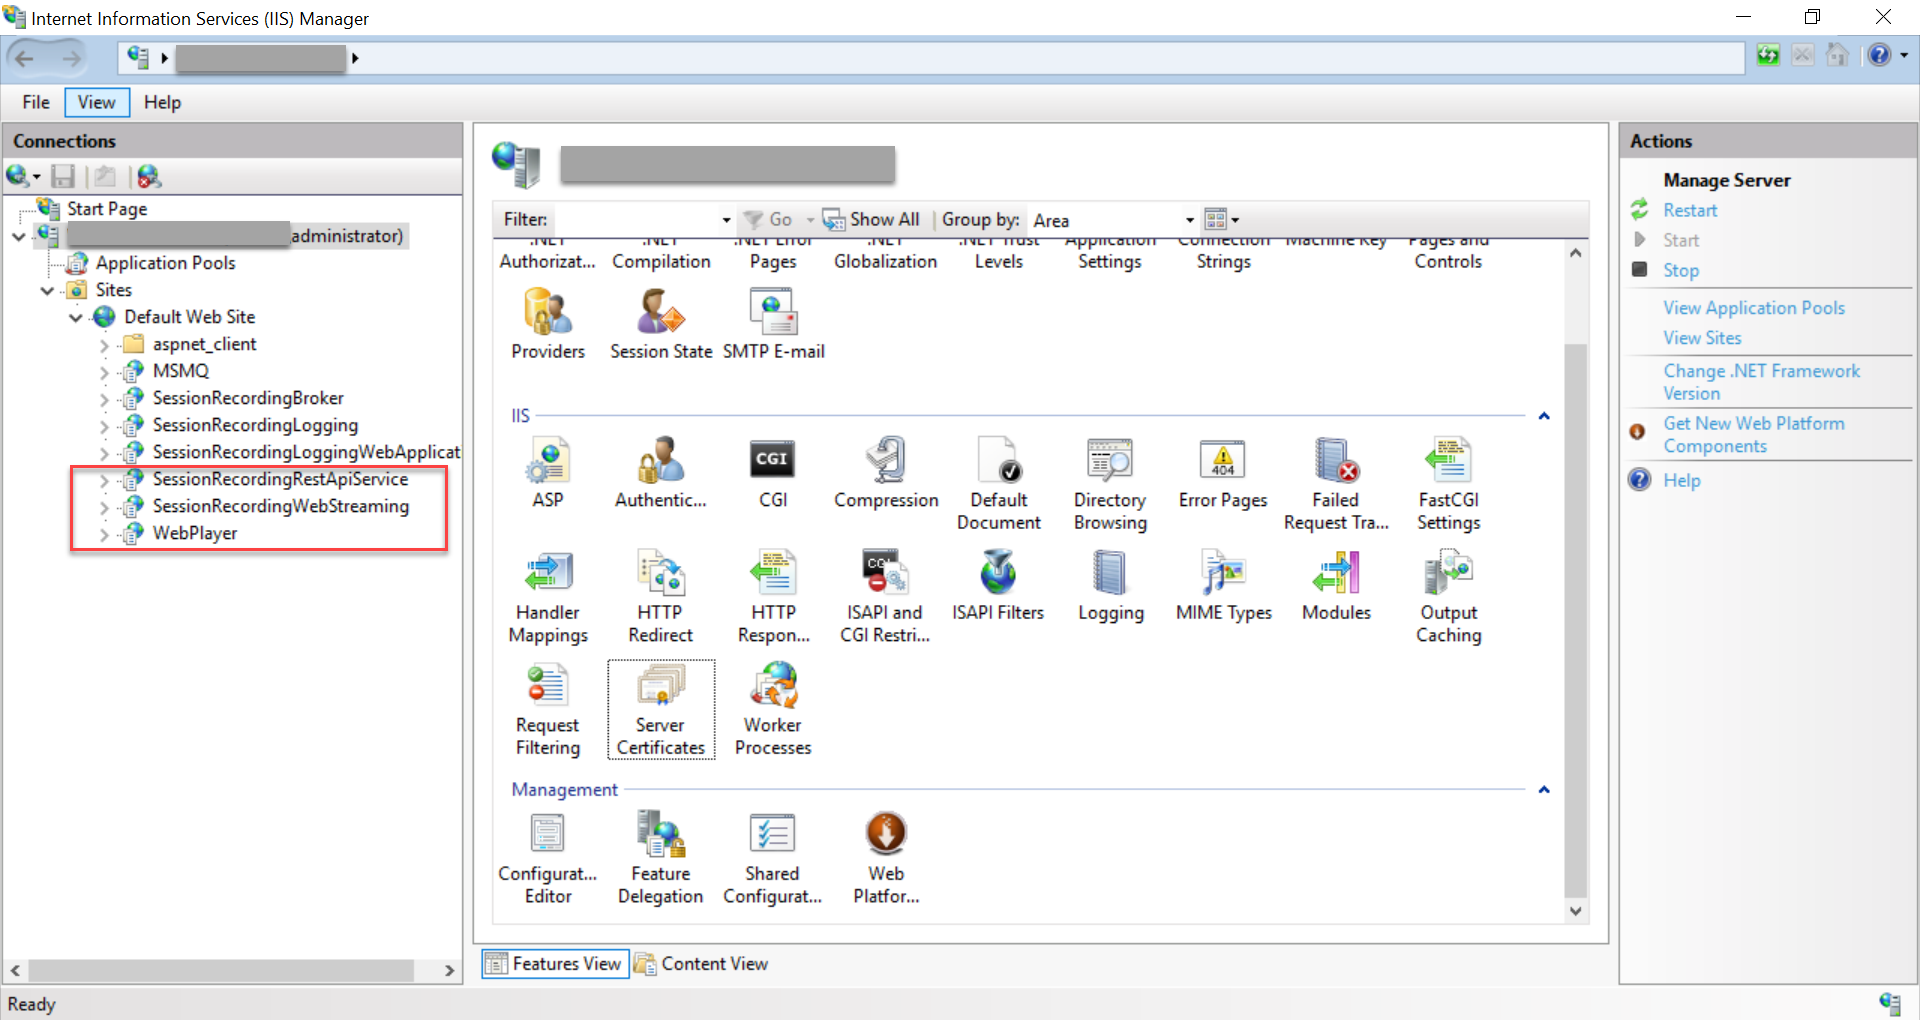 Applications hosted in IIS